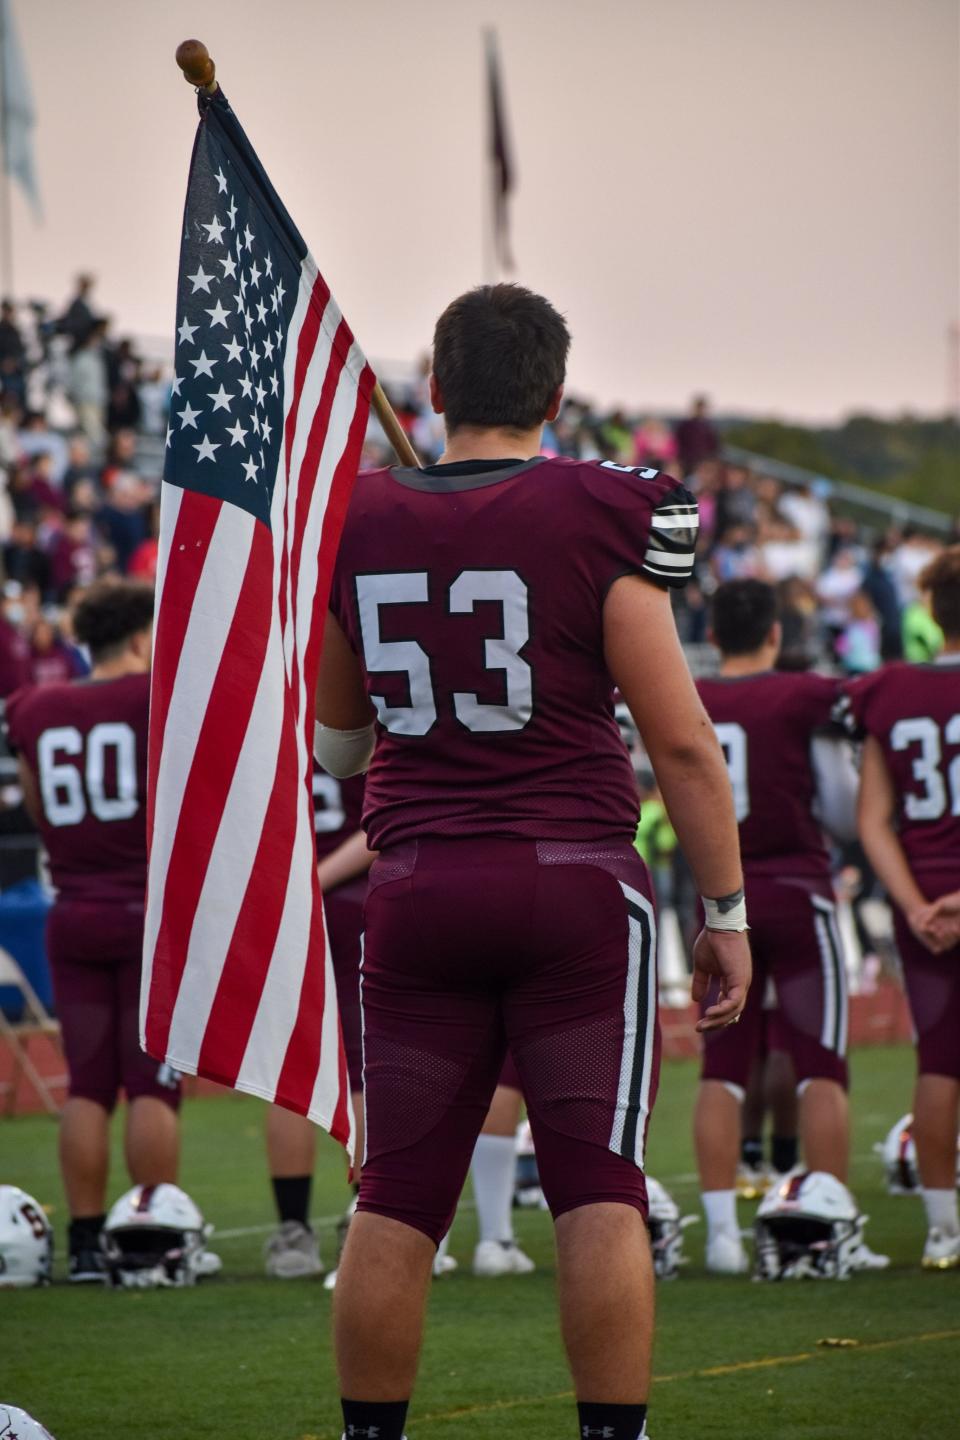 Stroudsburg senior Anthony Liguori holds a U.S. flag during the Stroudsburg fight song prior to Friday's game against Northampton on Sept. 10, 2021.